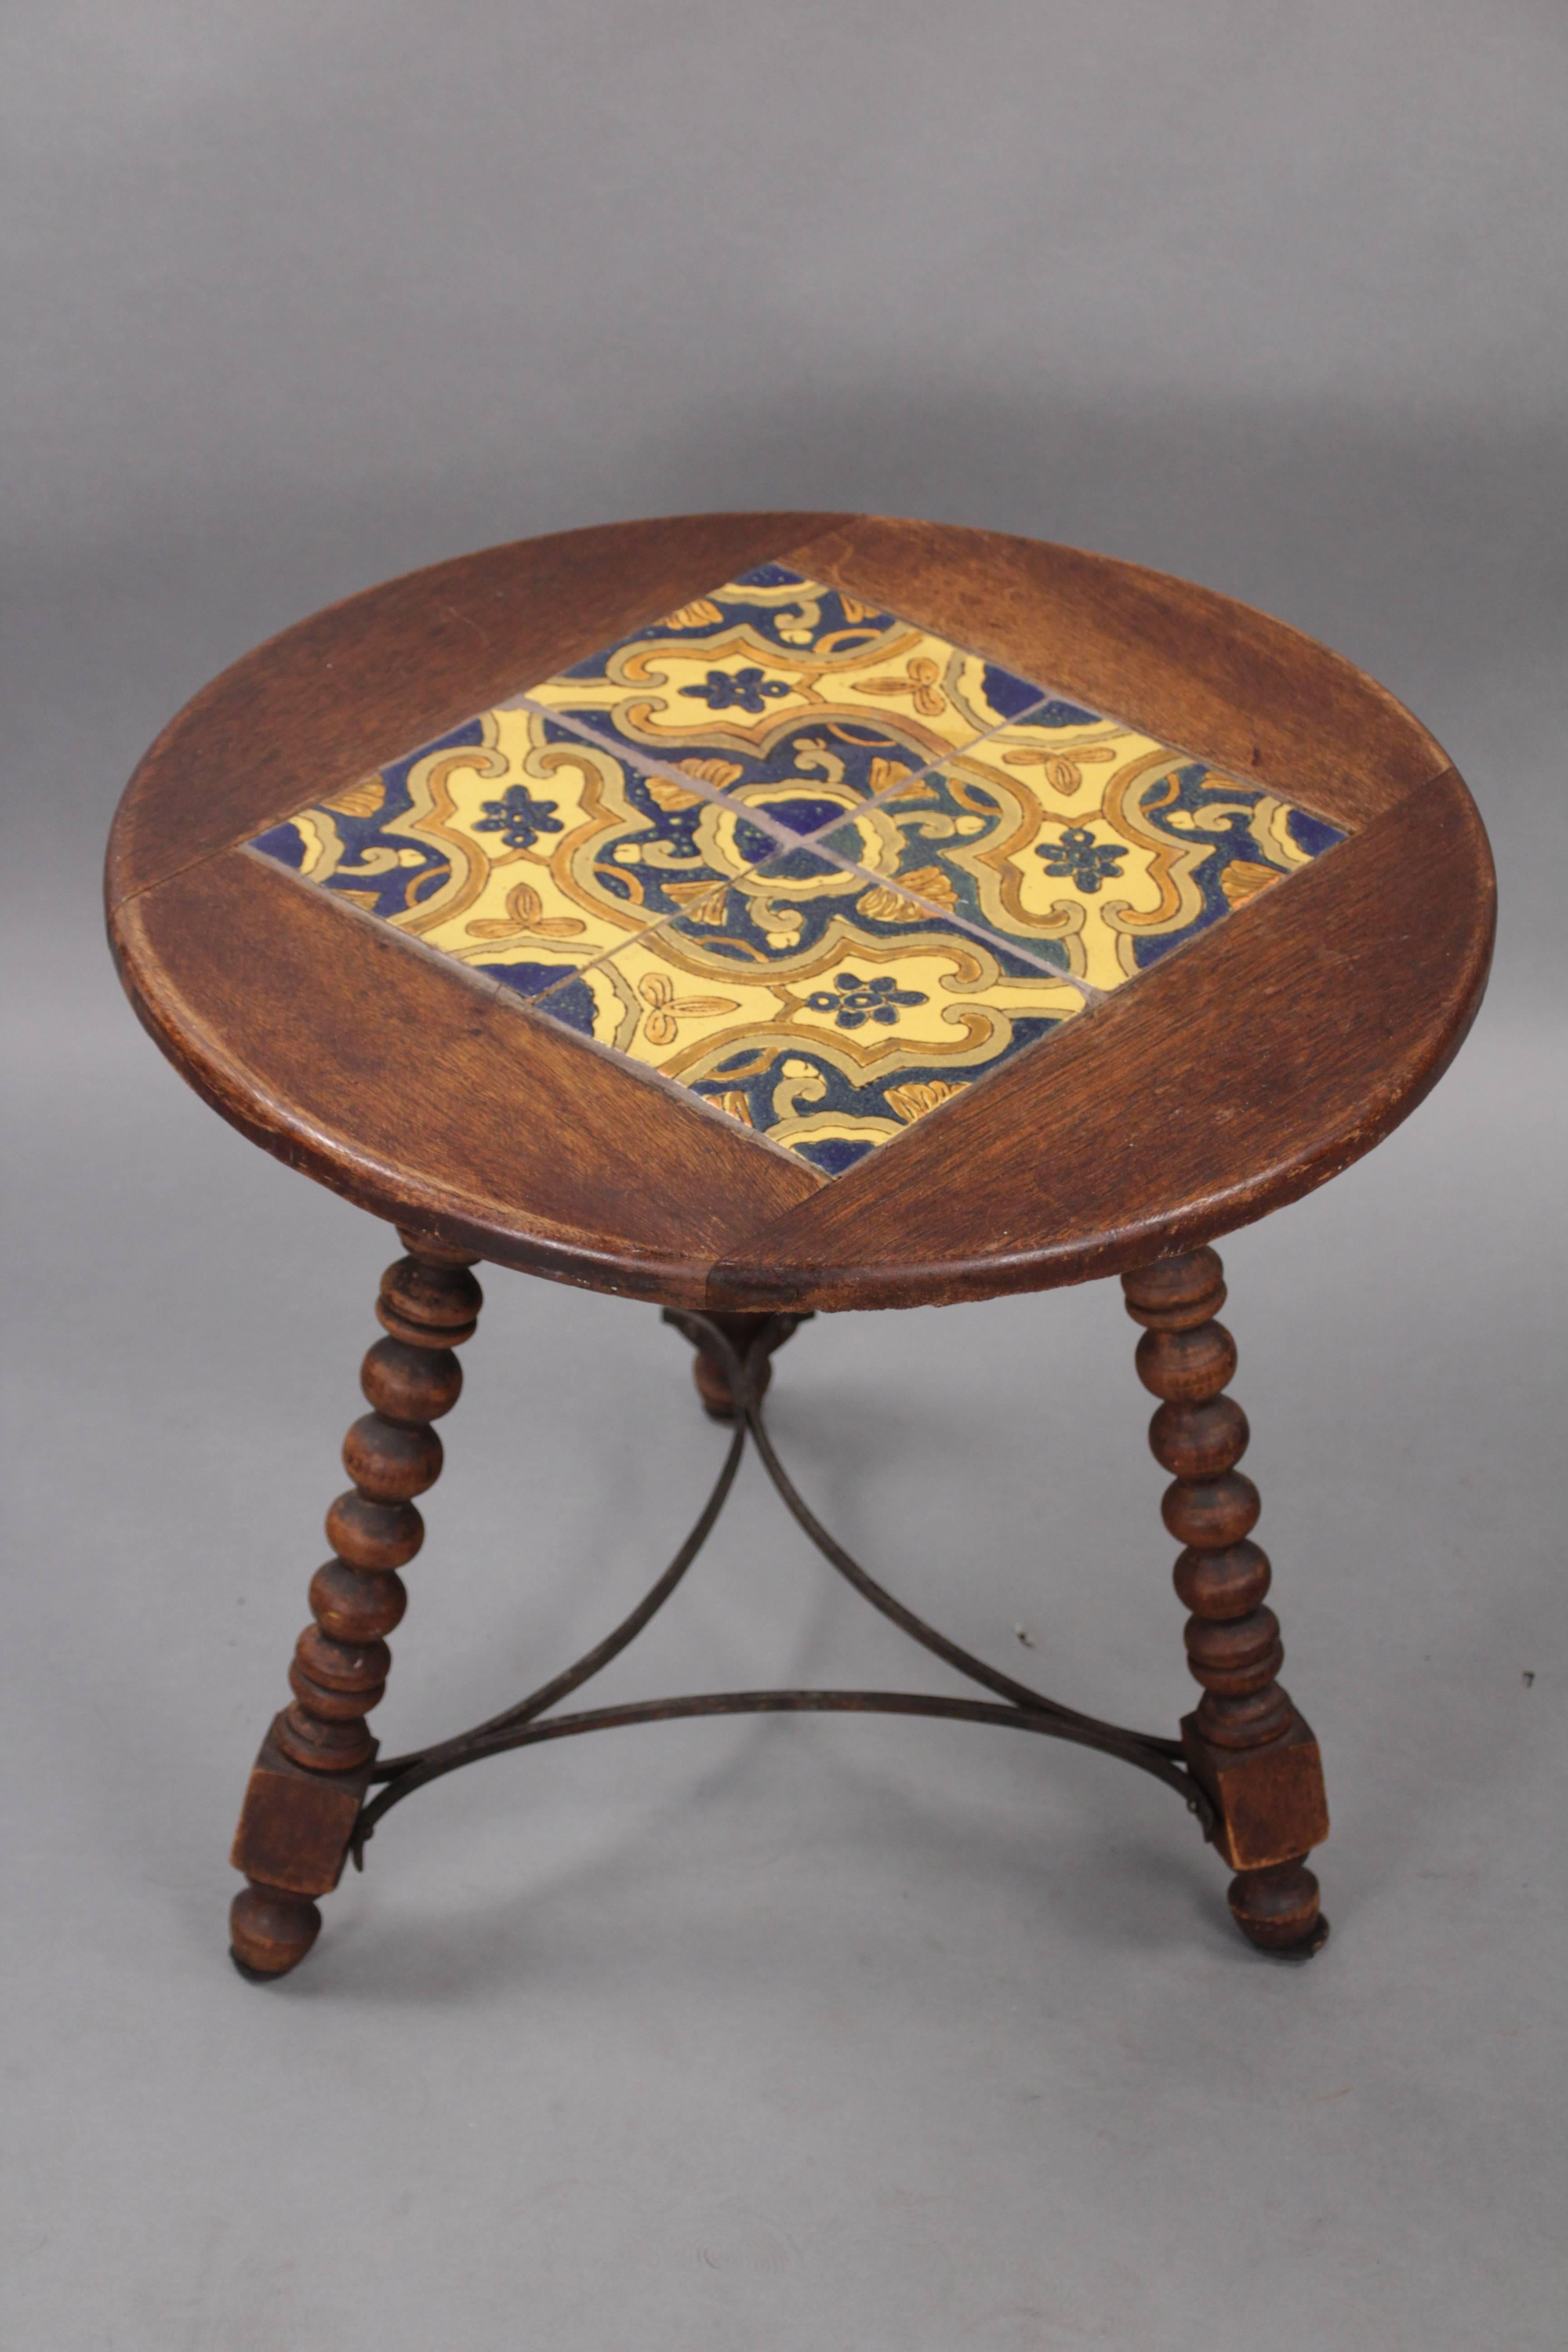 Wonderful round tile table with turned legs and iron stretchers, circa 1920s.